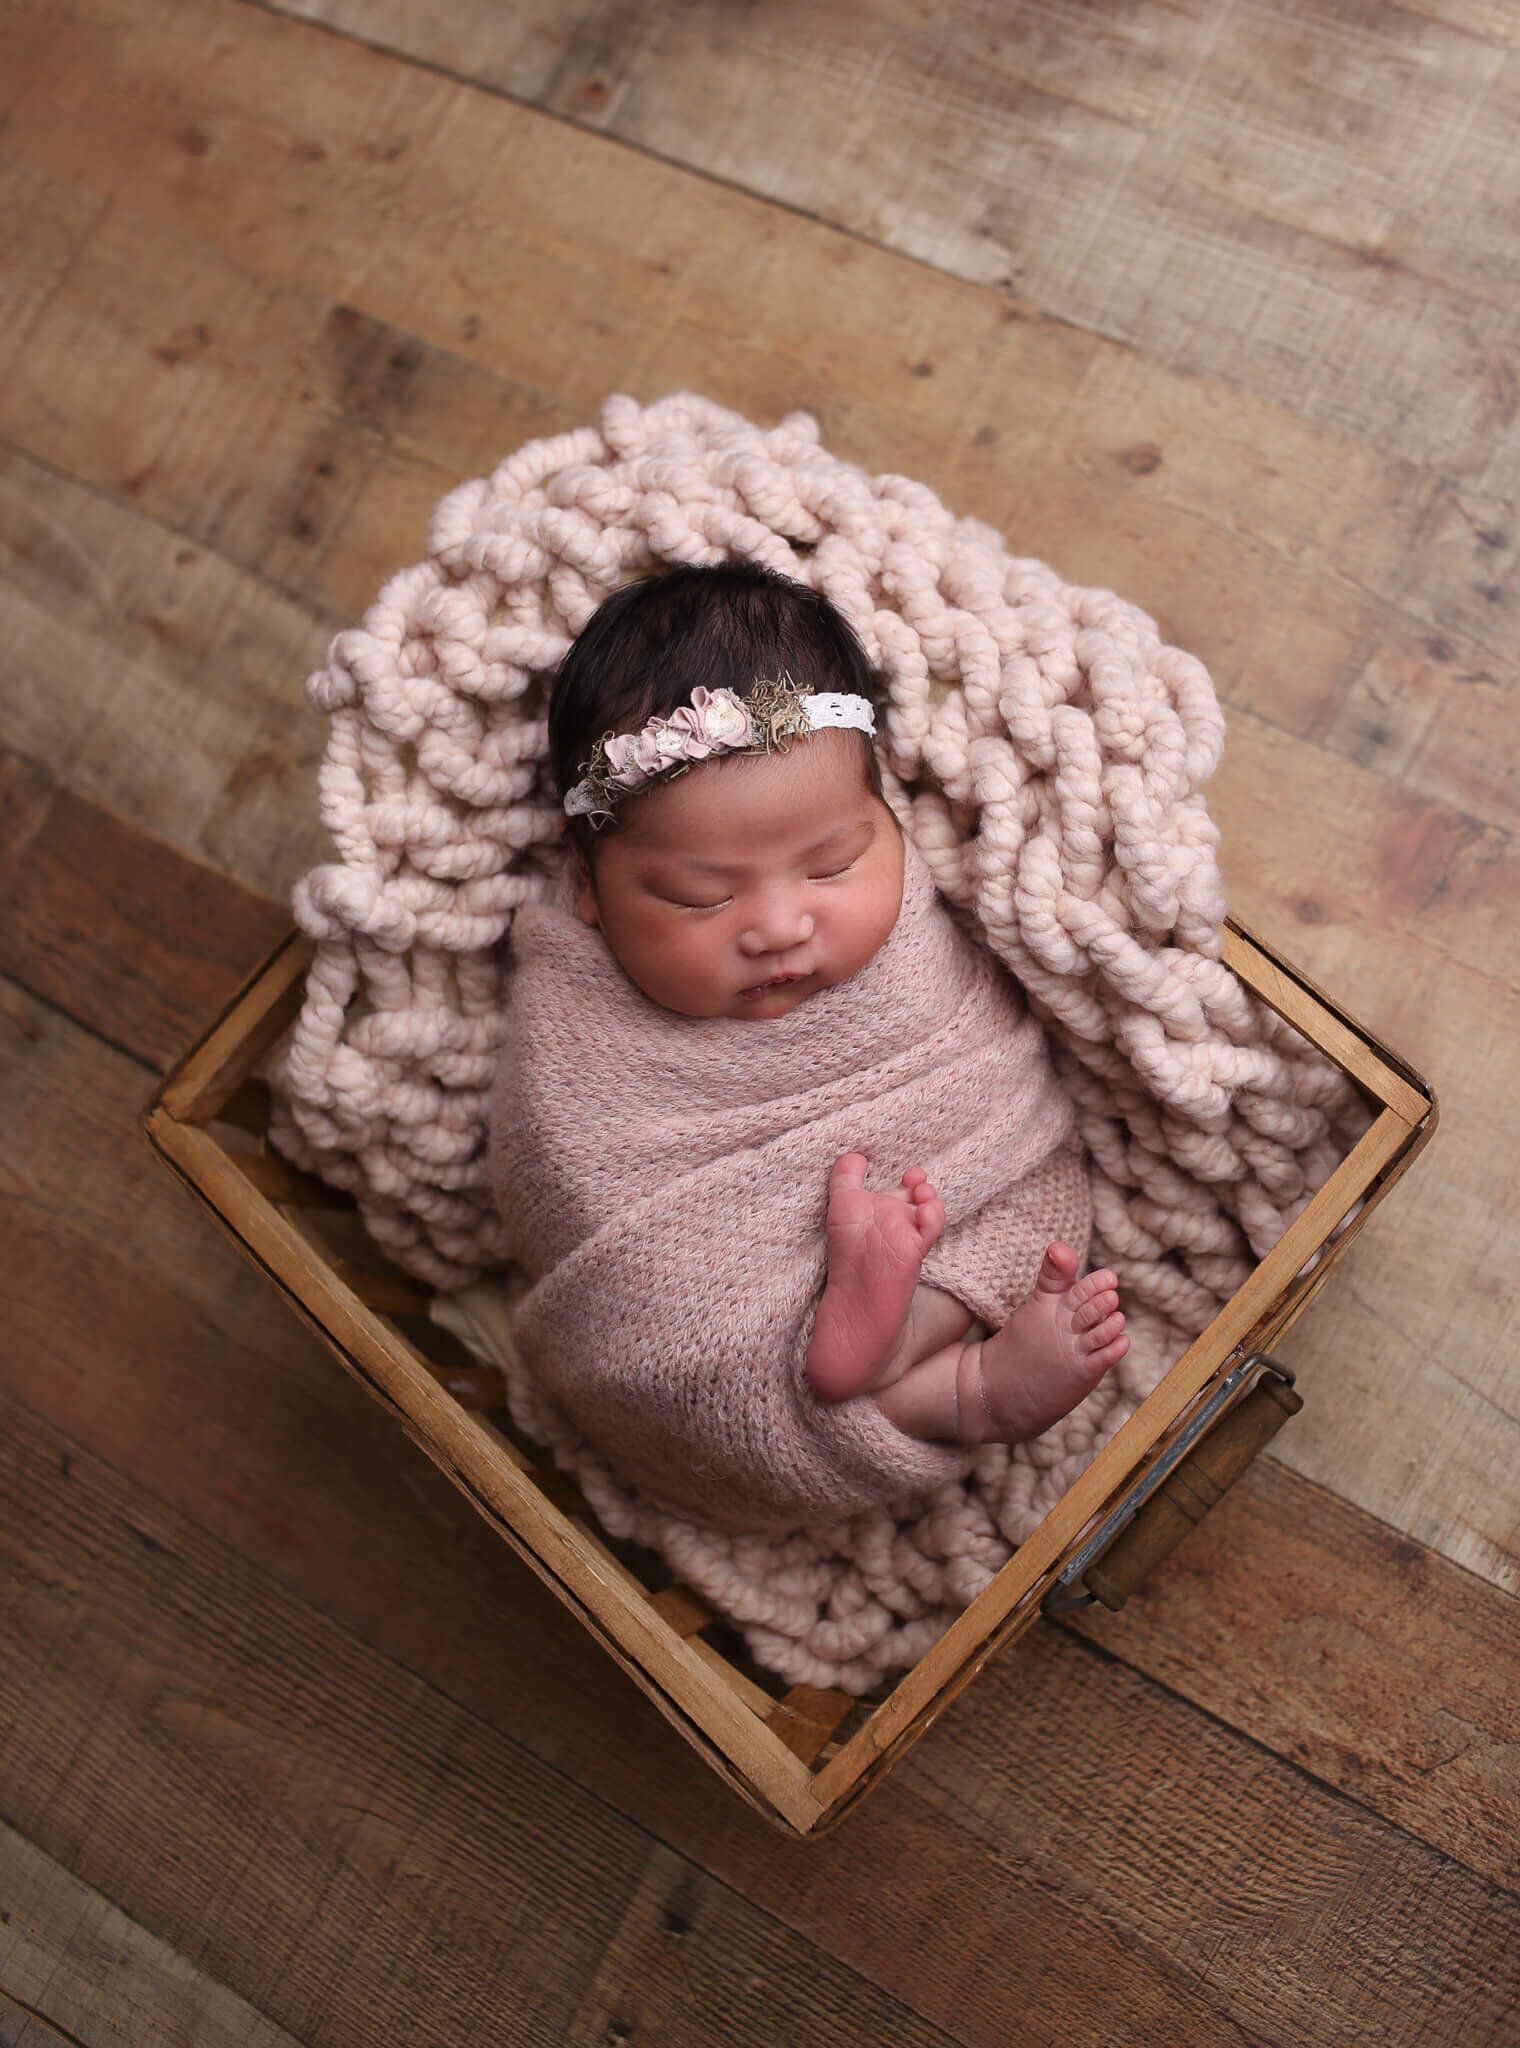  A photograph of a newborn girl in her headband, wrapped in a pink blanket with her tiny feet showing, sleeping in a wooden basket from a newborn picture session 